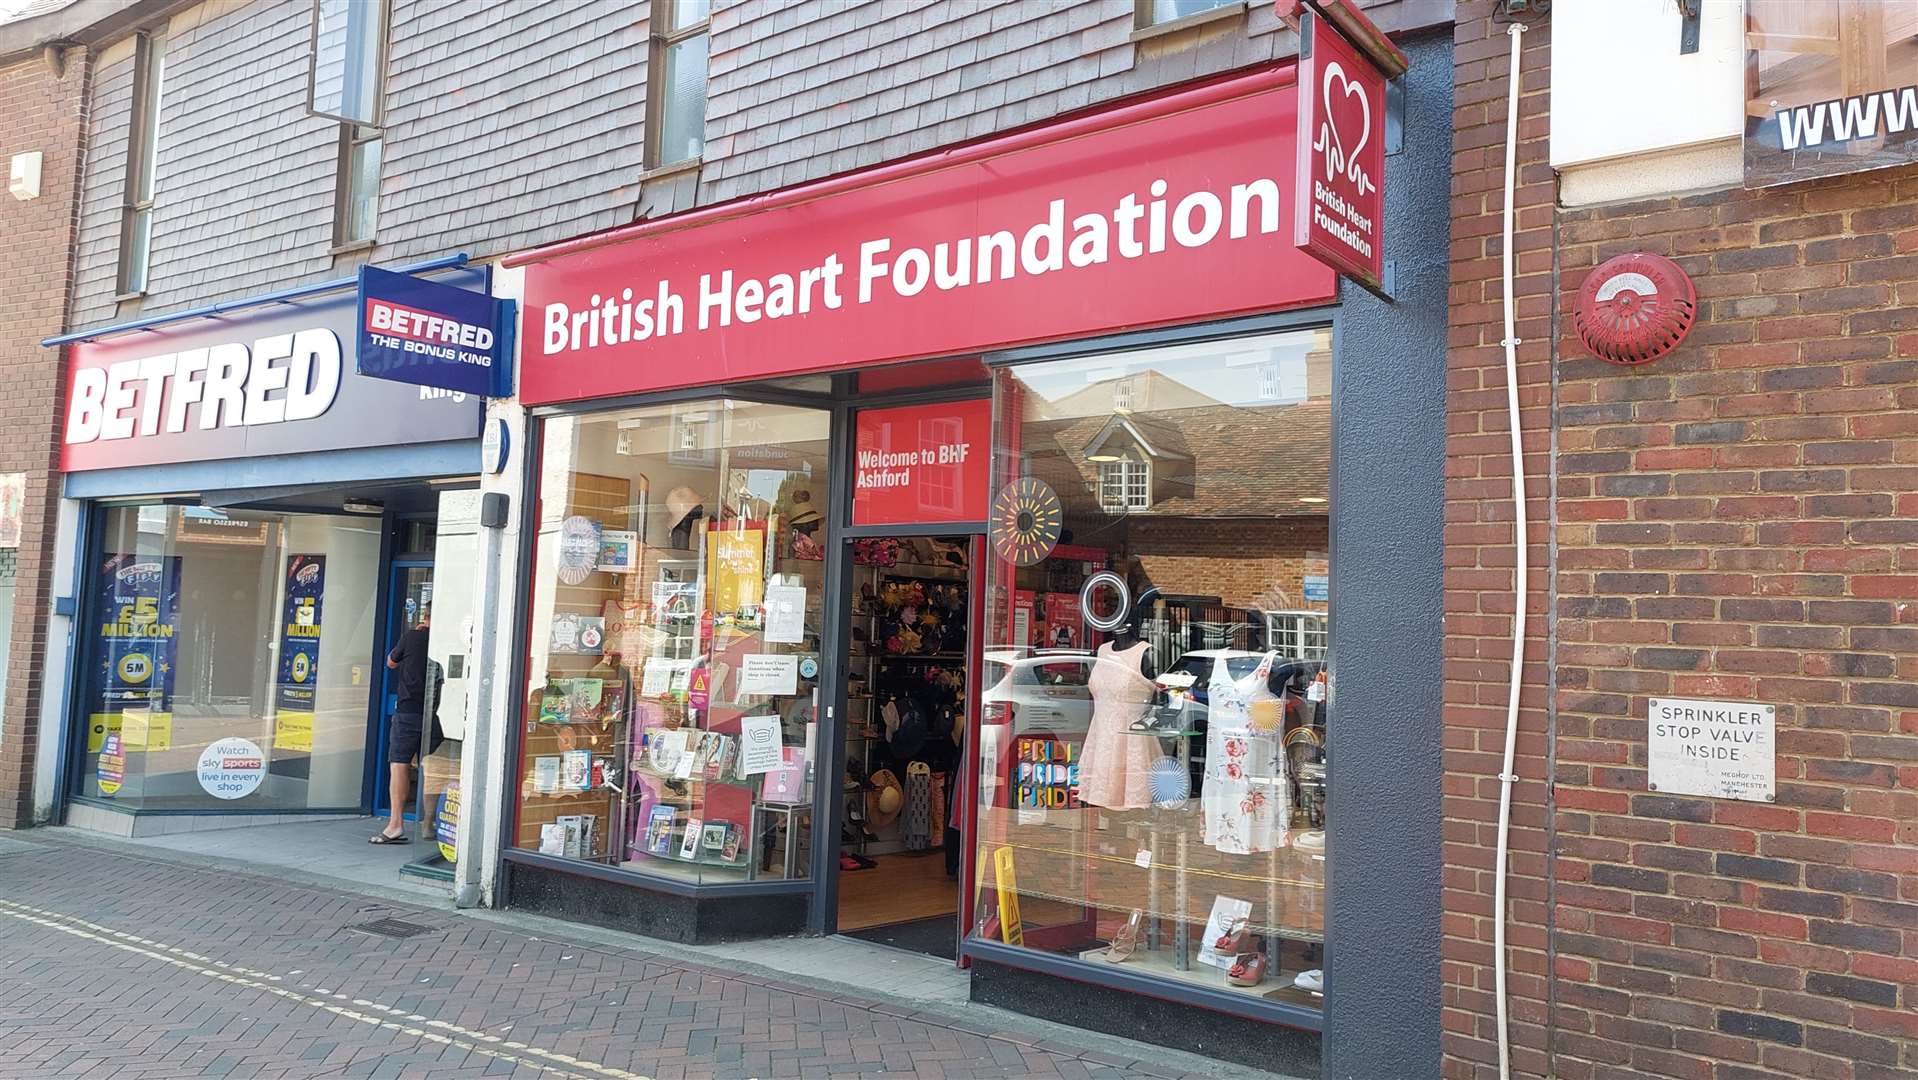 After 30 years in Ashford, British Heart Foundation is pulling out of the town